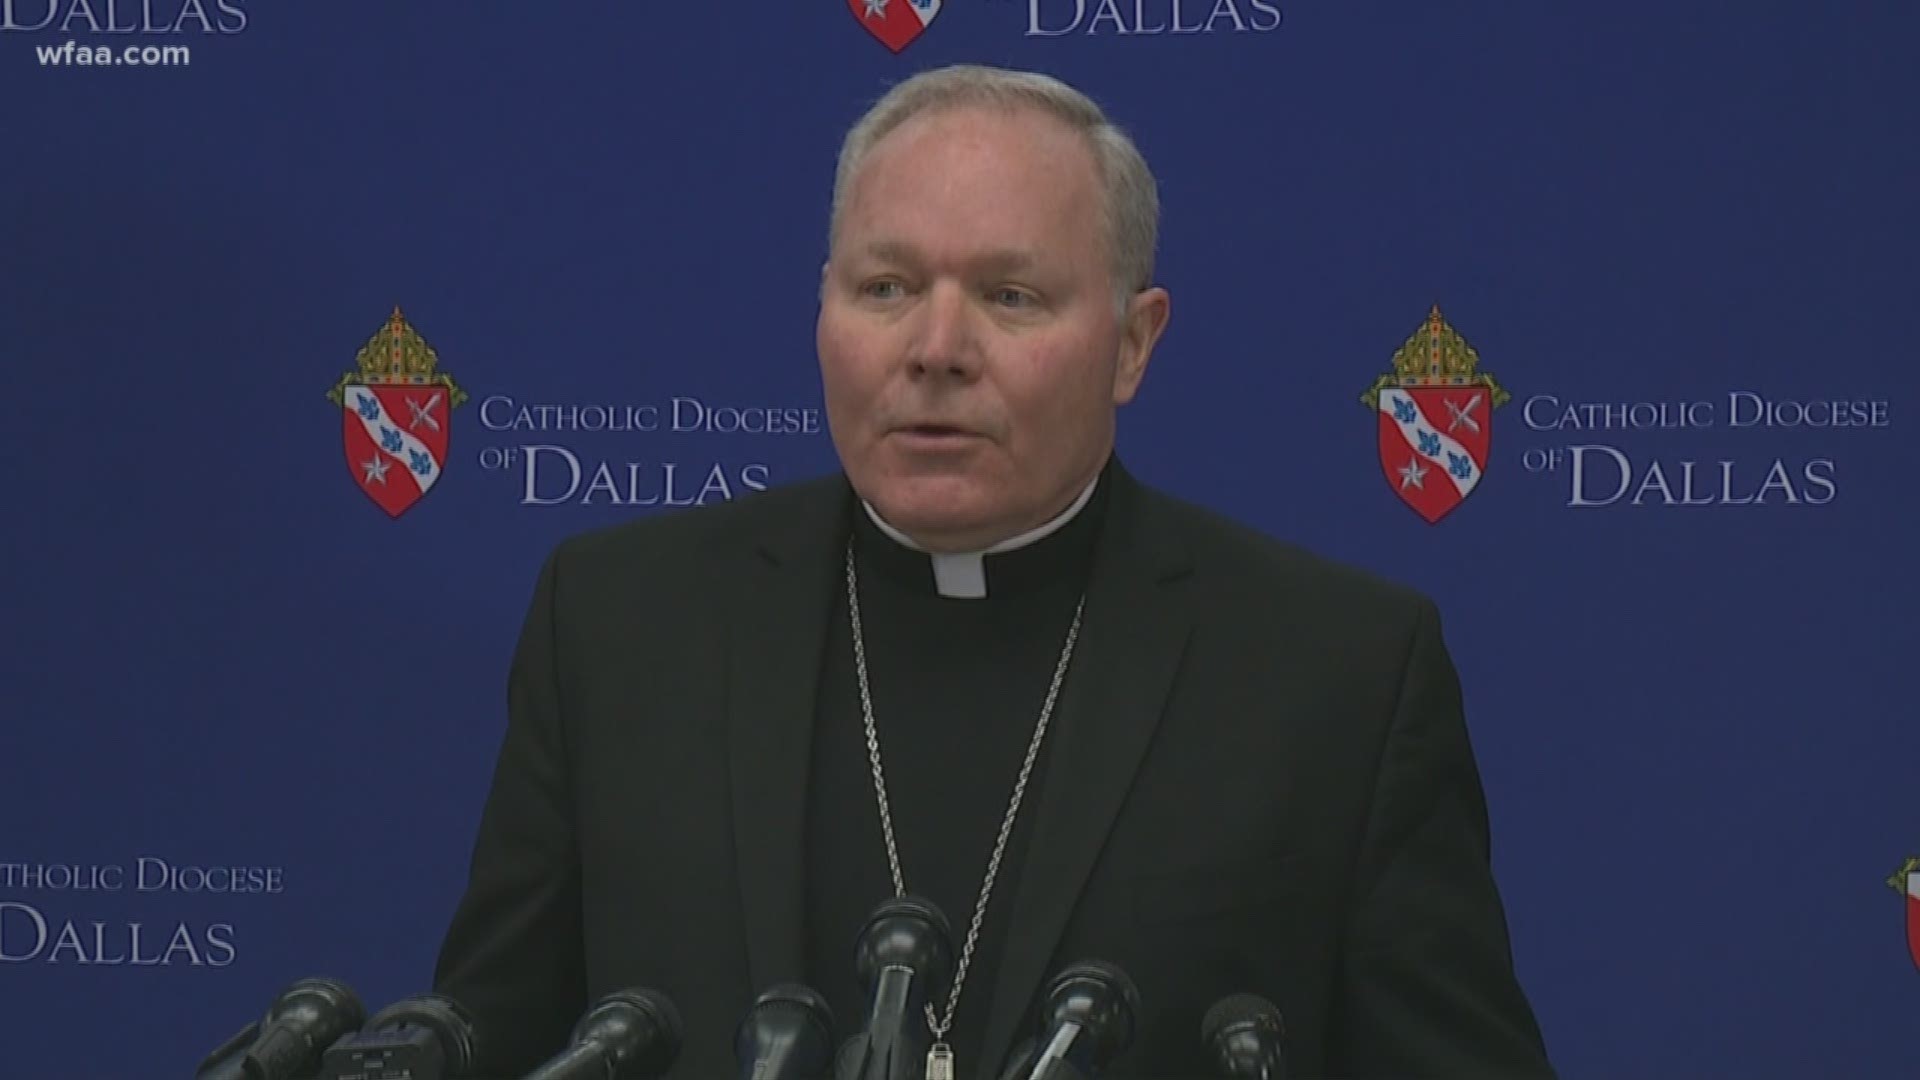 Dallas Catholic Diocese: Church to release names of 'credibly accused'